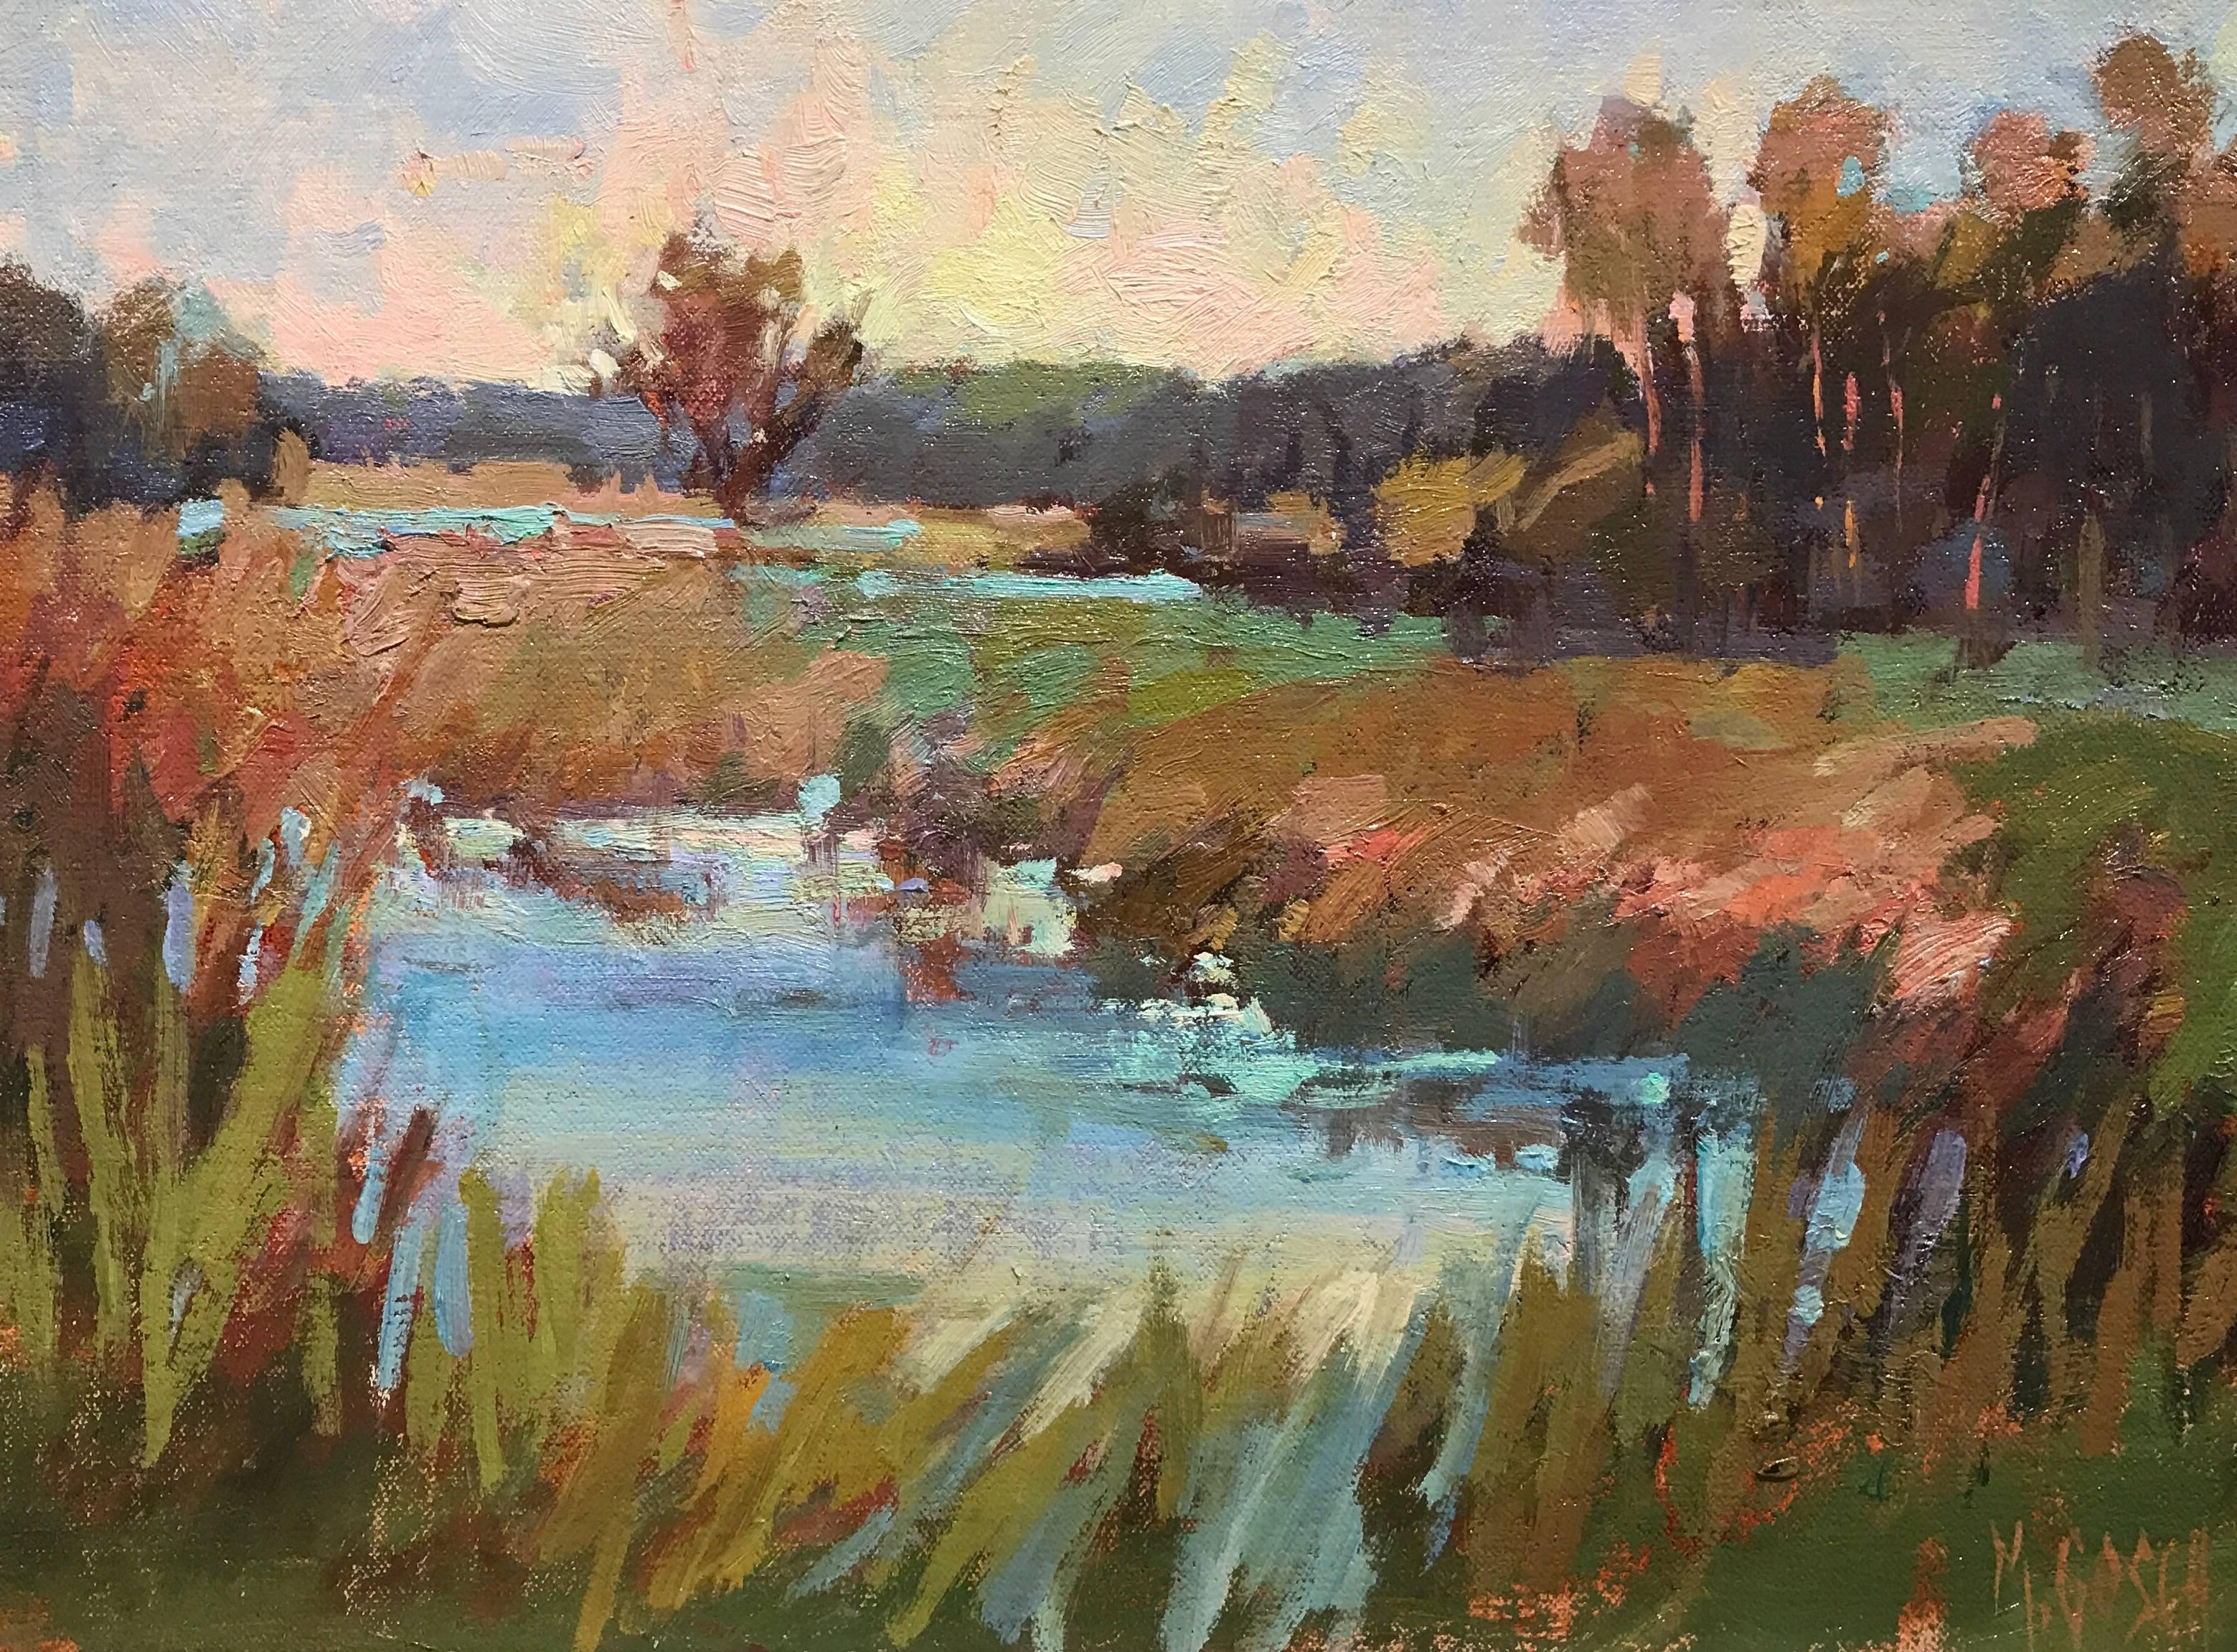 This beautiful piece was painted en plein air in south Georgia by American artist Millie Gosch.  The palette is infused with green, blue, orange, pink and brown.  A beautiful palette and soothing brushstrokes add interest to this gorgeous southern